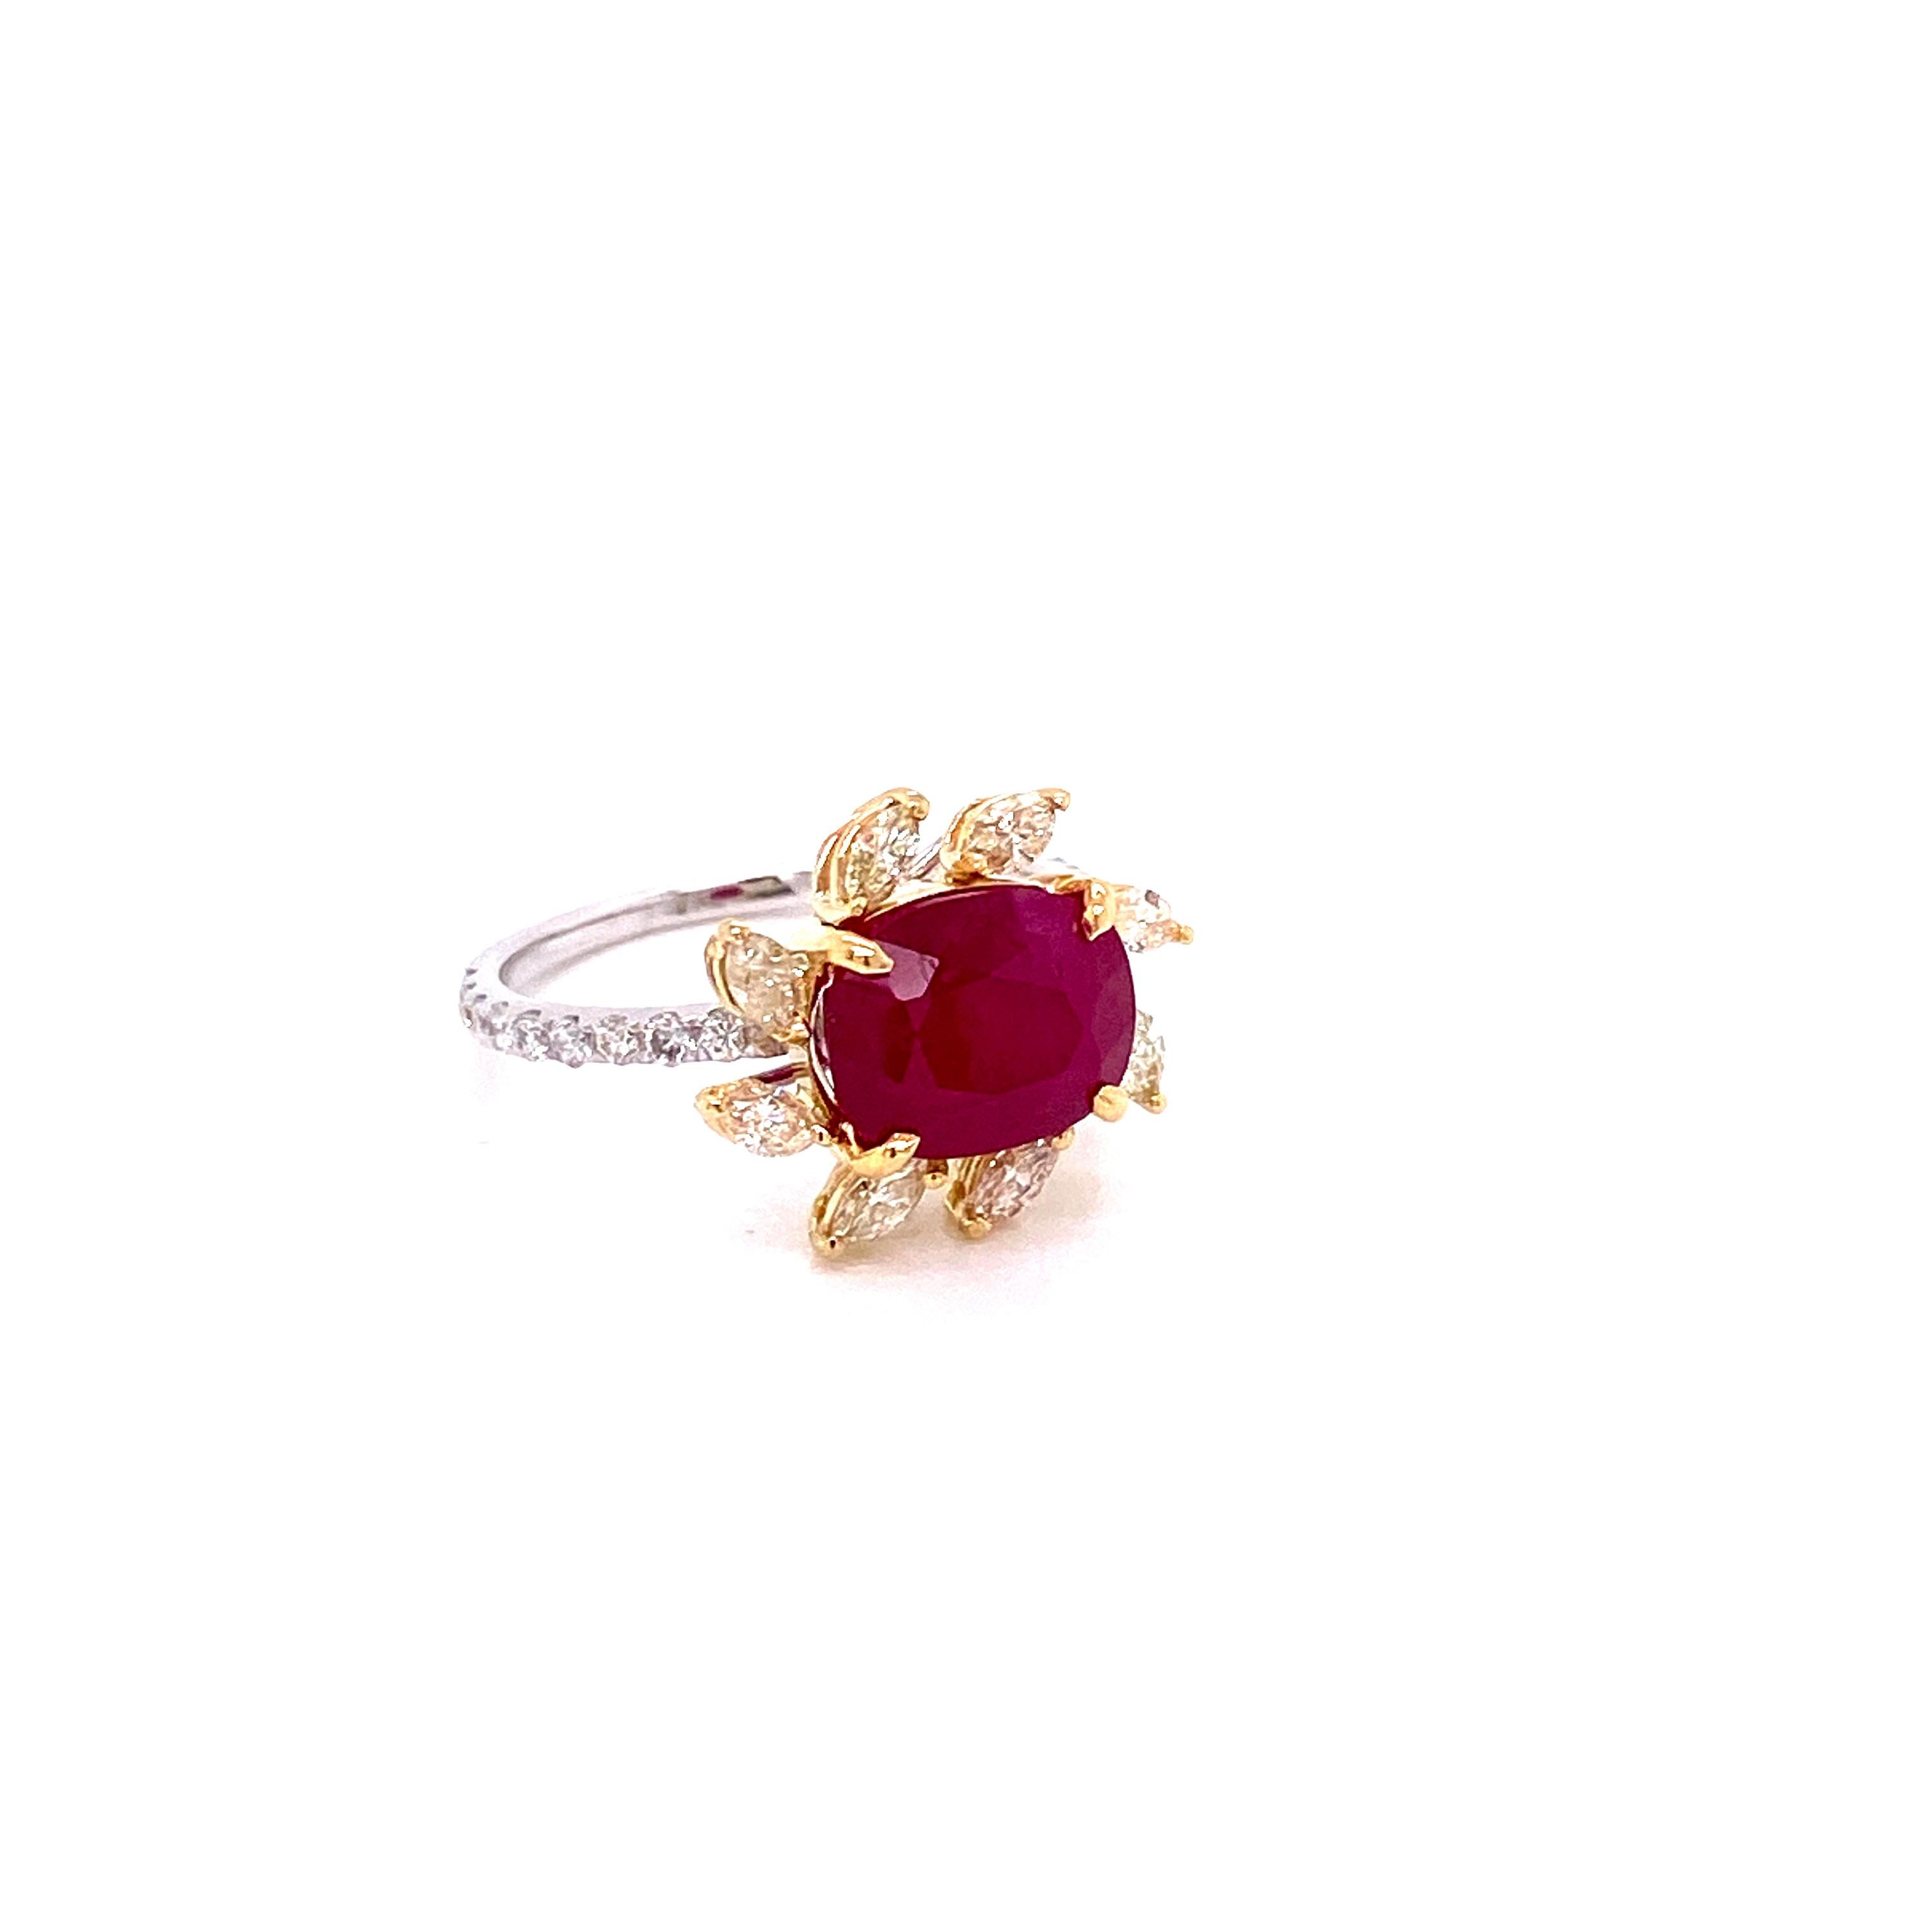 3.58 carat GRS Certified Unheated Burmese Ruby and Diamond Gold Engagement Ring:

A rare ring, it features a stunning unheated Burmese ruby weighing 3.58 carat, surrounded by a unique halo of yellow diamonds weighing 0.47 carat, and white round